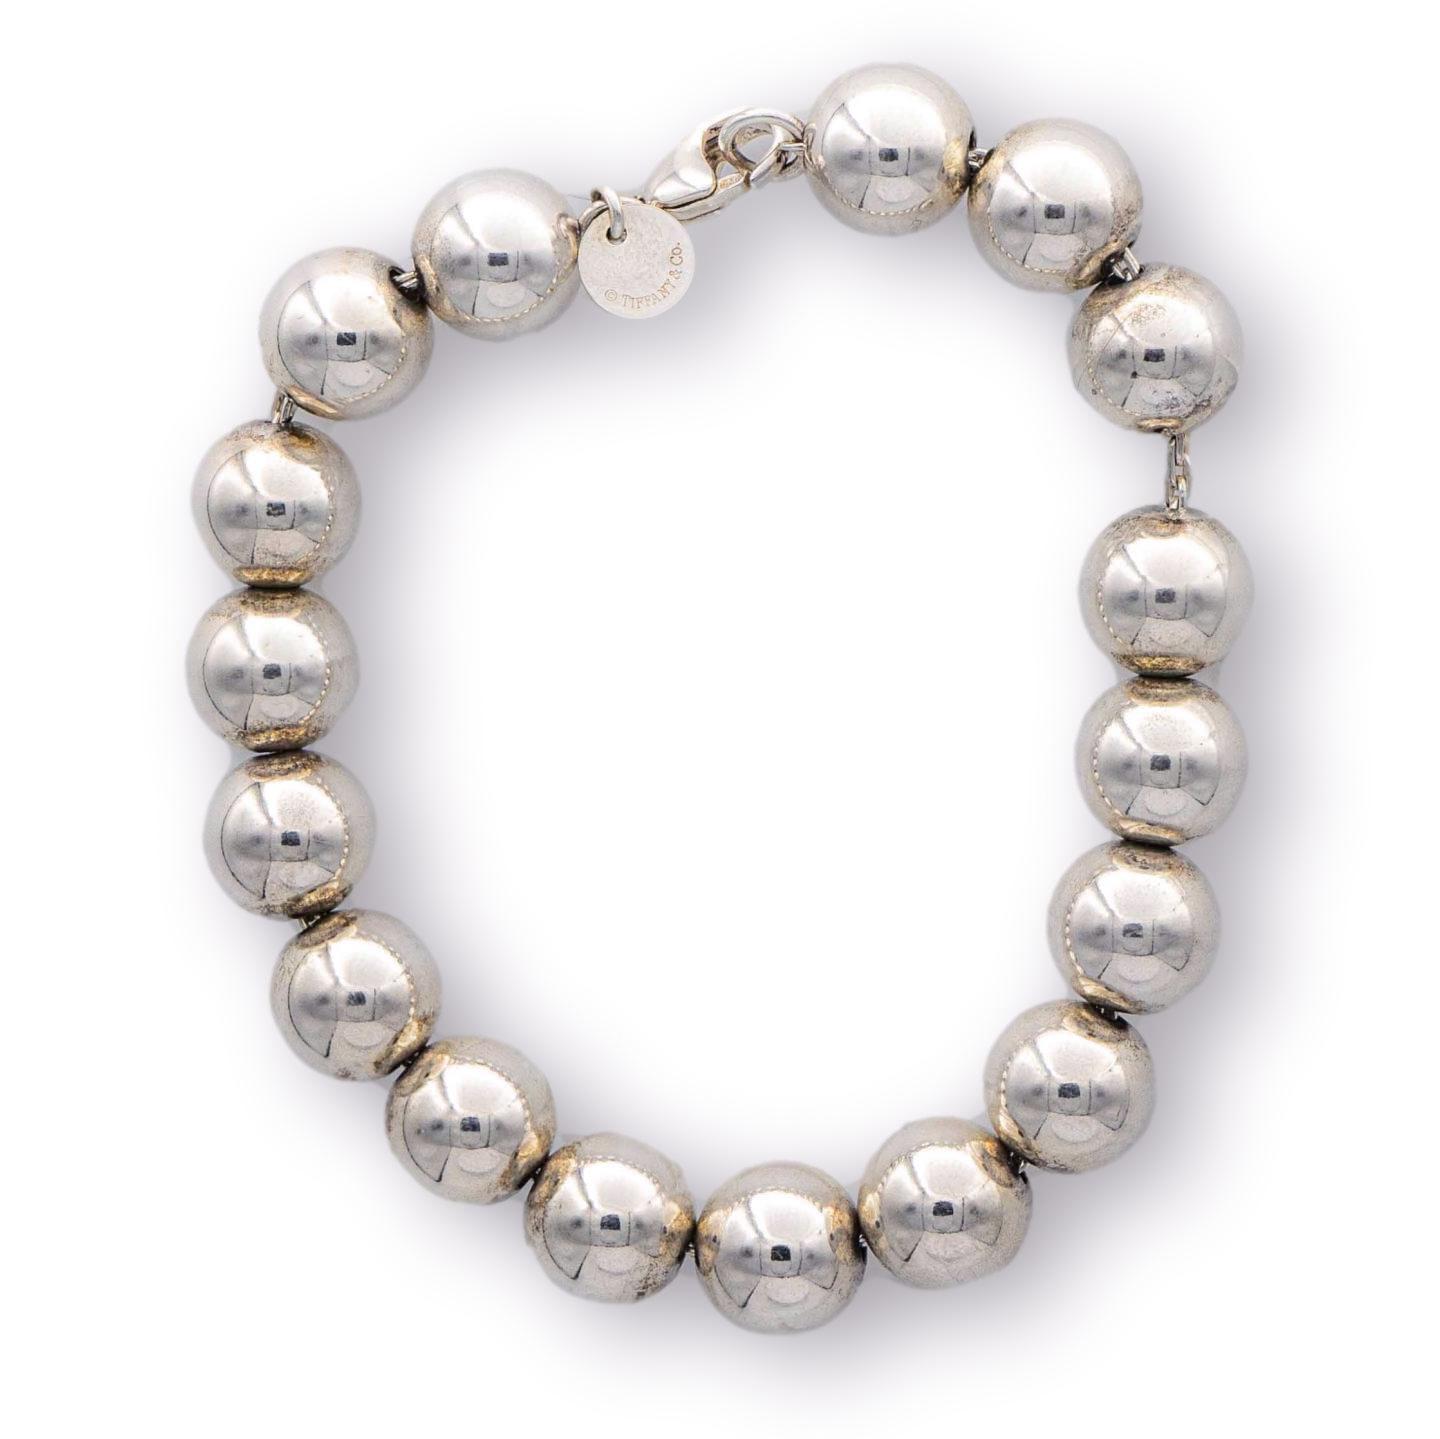 Tiffany & co. ball bracelet from the Hardwear collection finely crafted in fine sterling silver with 17 balls measuring 10mm each , with a length of 6.5